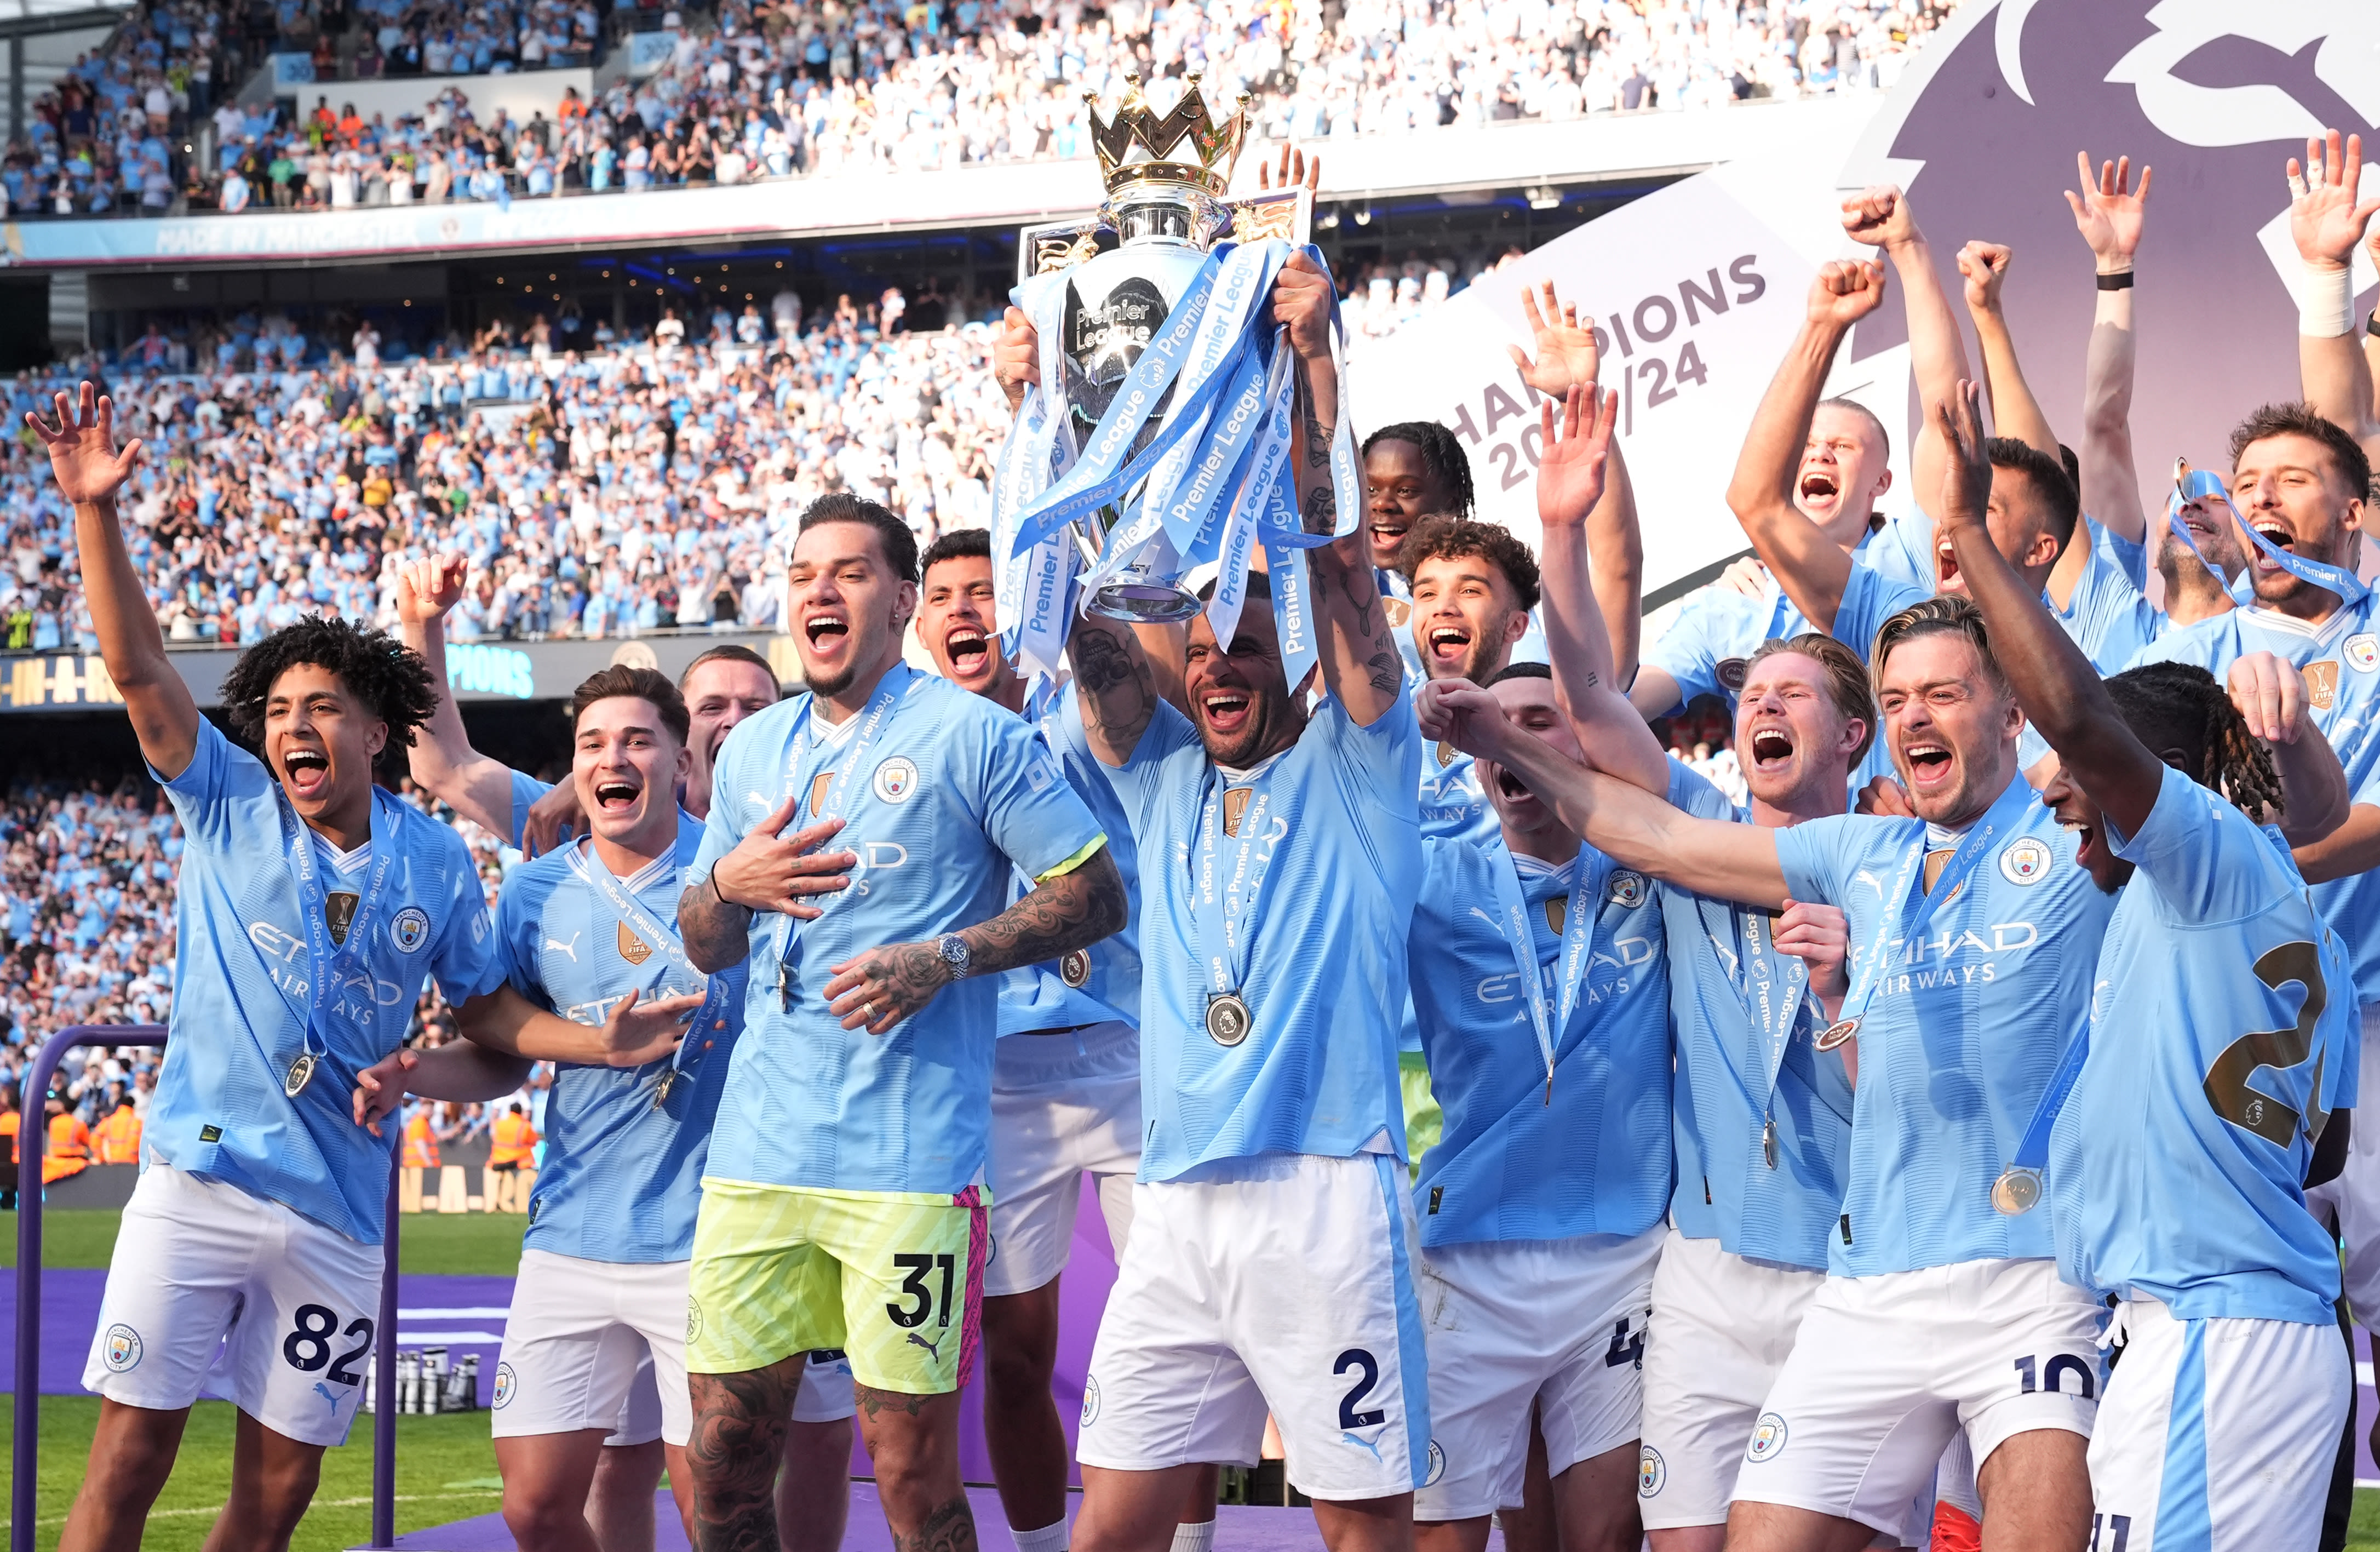 EPL TALK: Manchester City’s fourth title in row deserves praise, even if the outcome feels cold